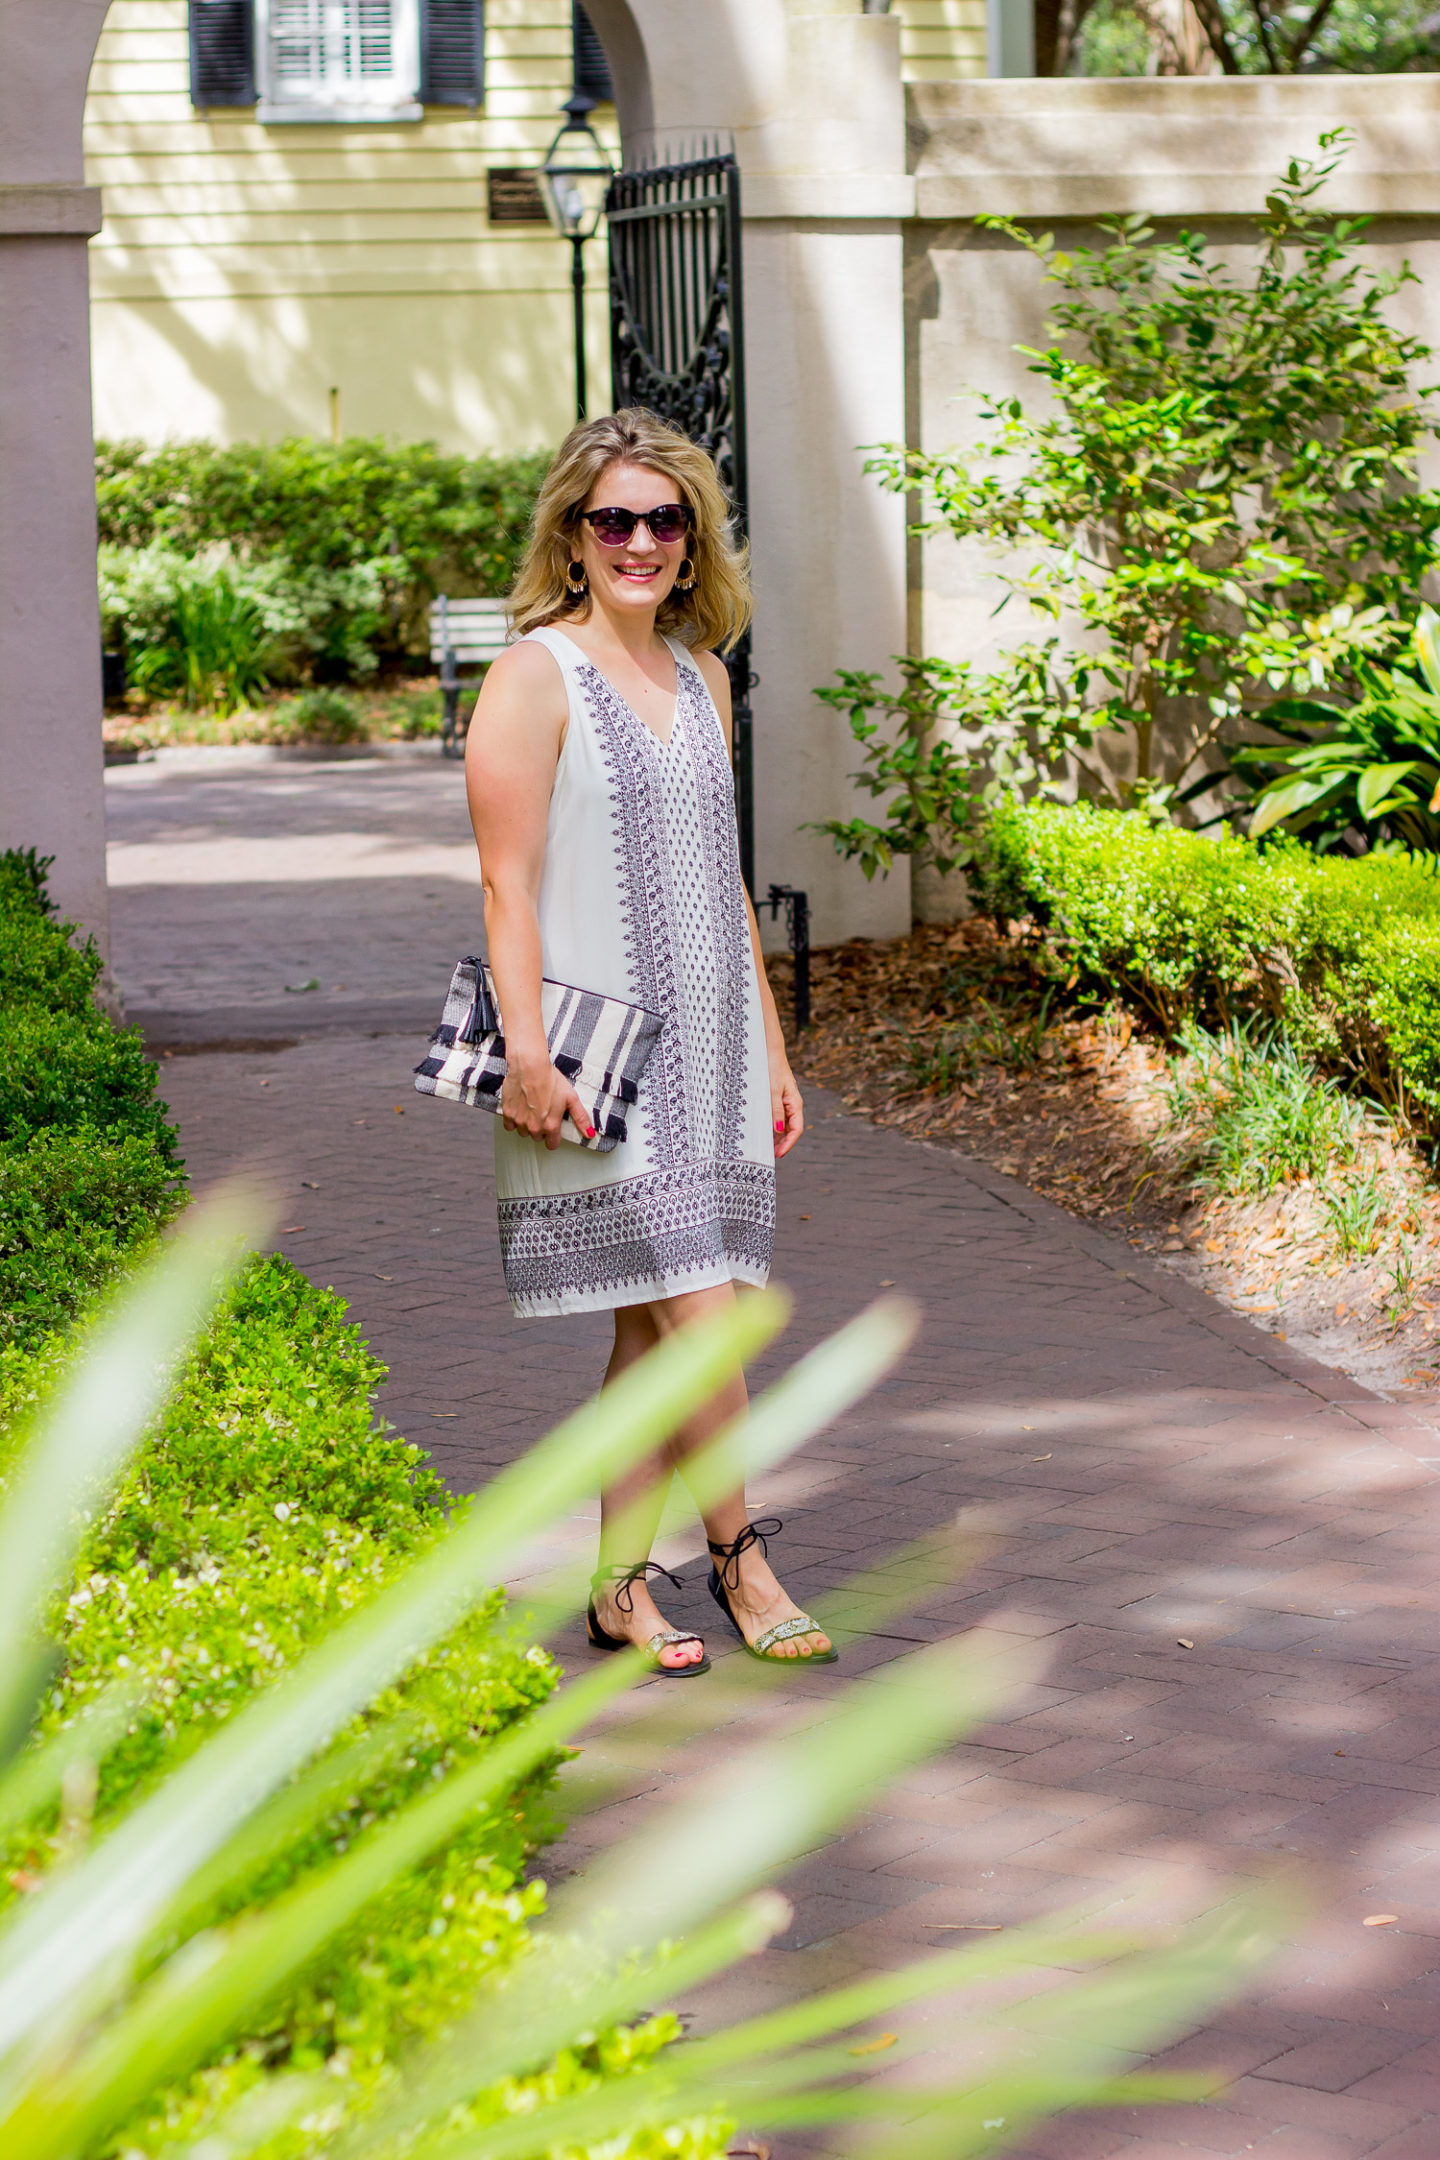 Summer white dress by Old Navy on Belle Meets World blog